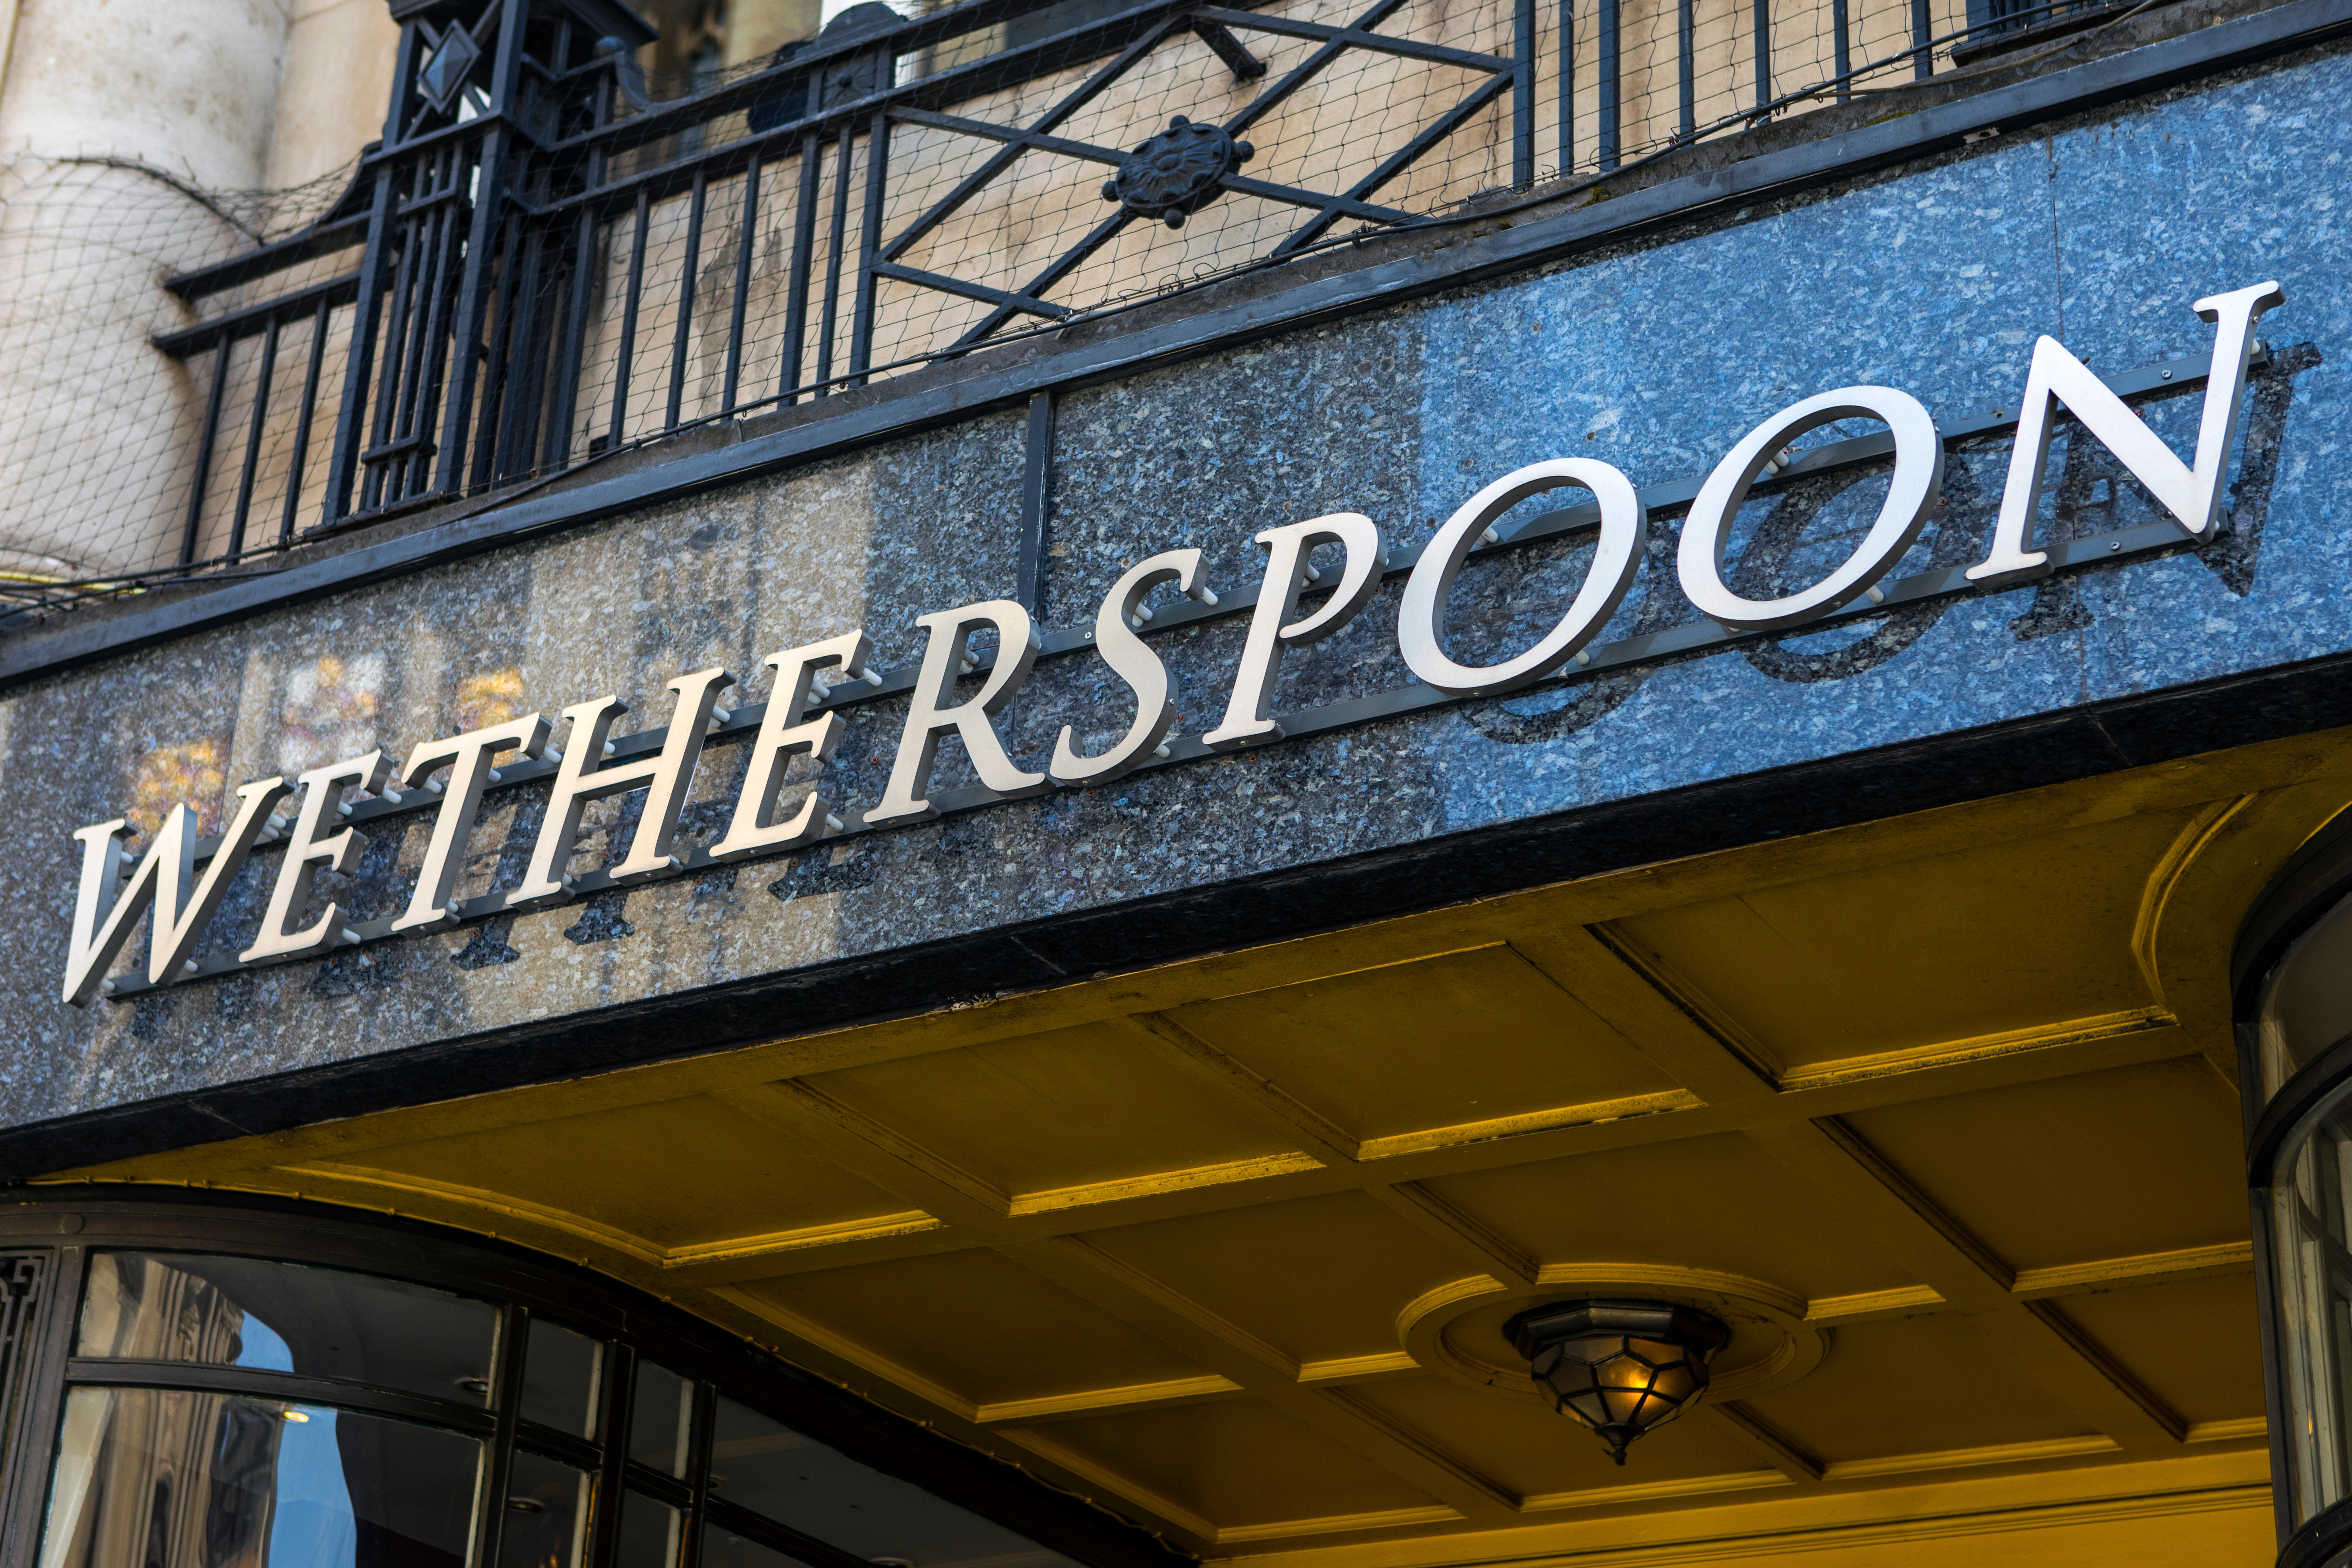 Wetherspoon has over 800 pubs in the UK